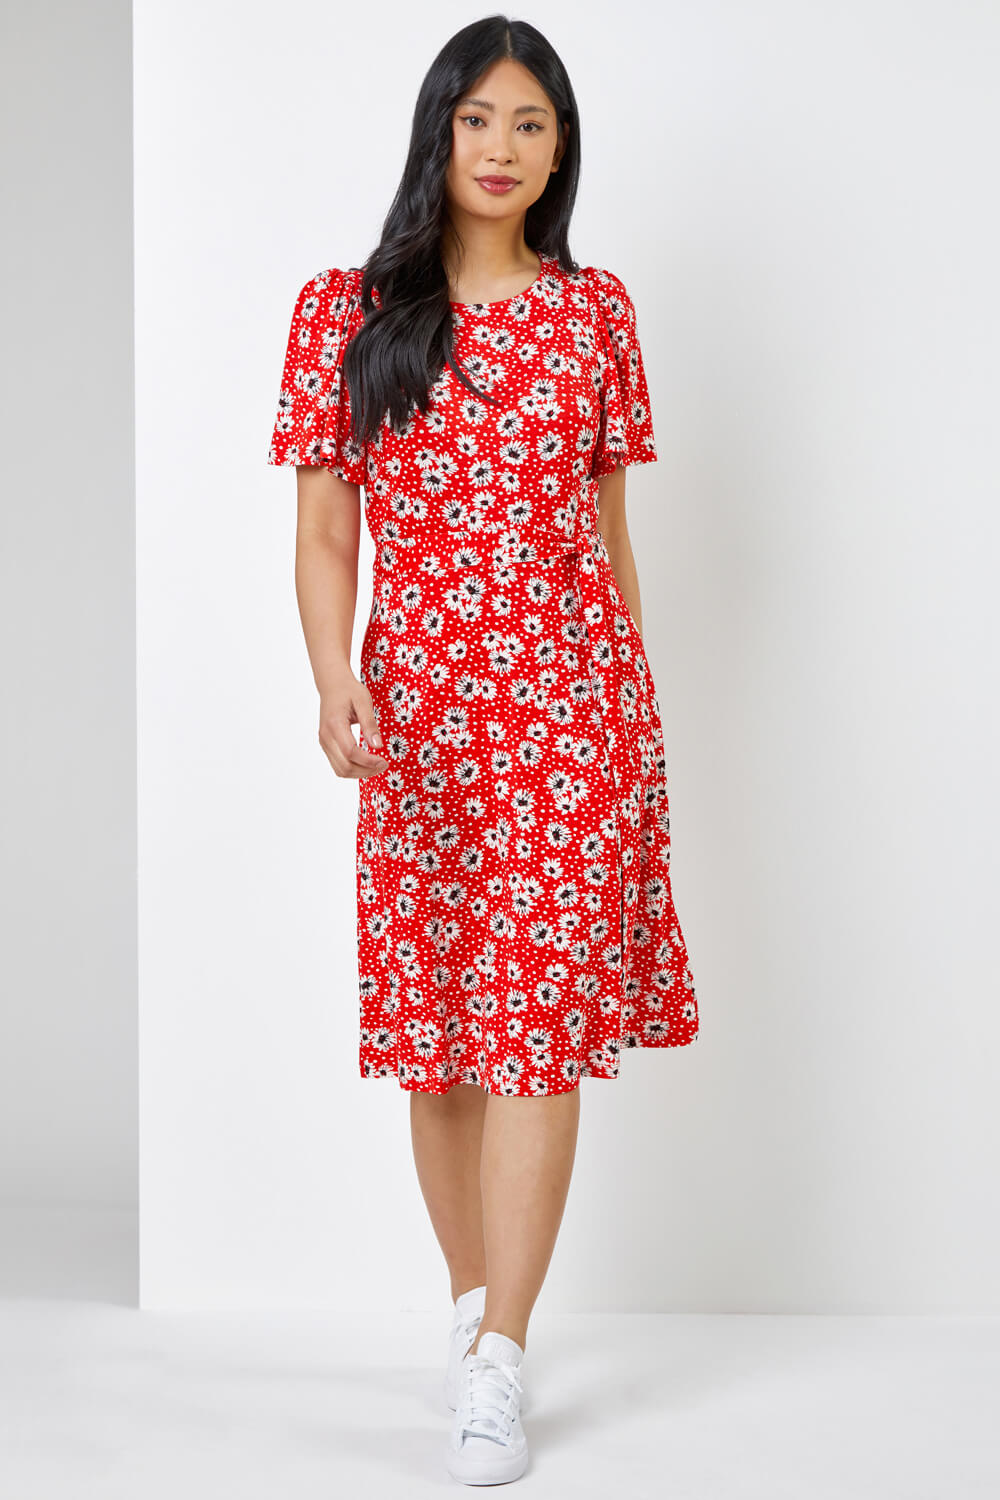 Red Petite Floral Print Jersey Dress, Image 5 of 5